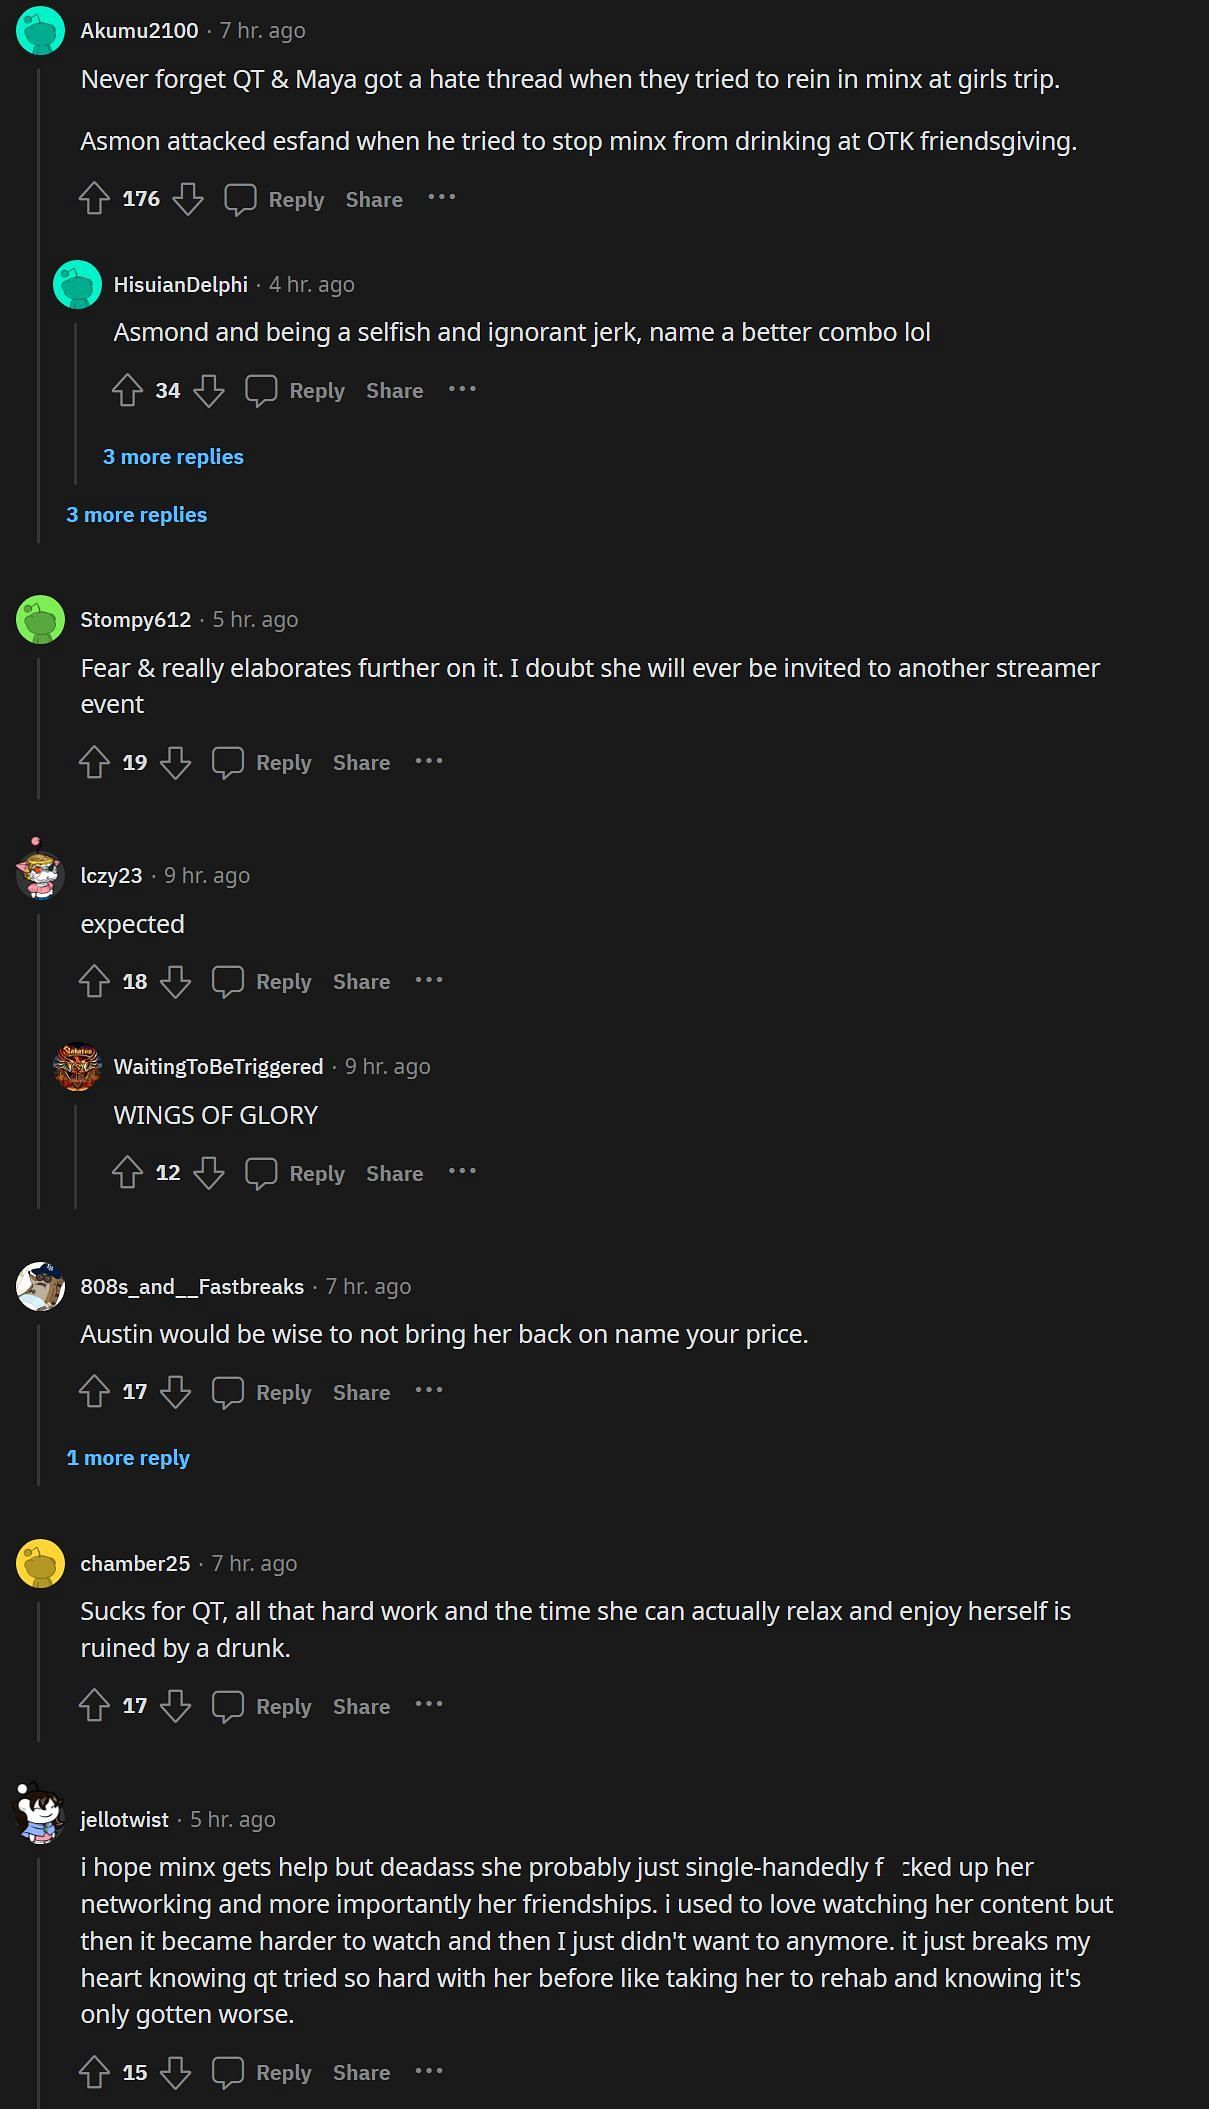 More comments on the streamer (Image via r/LivestreamFail)